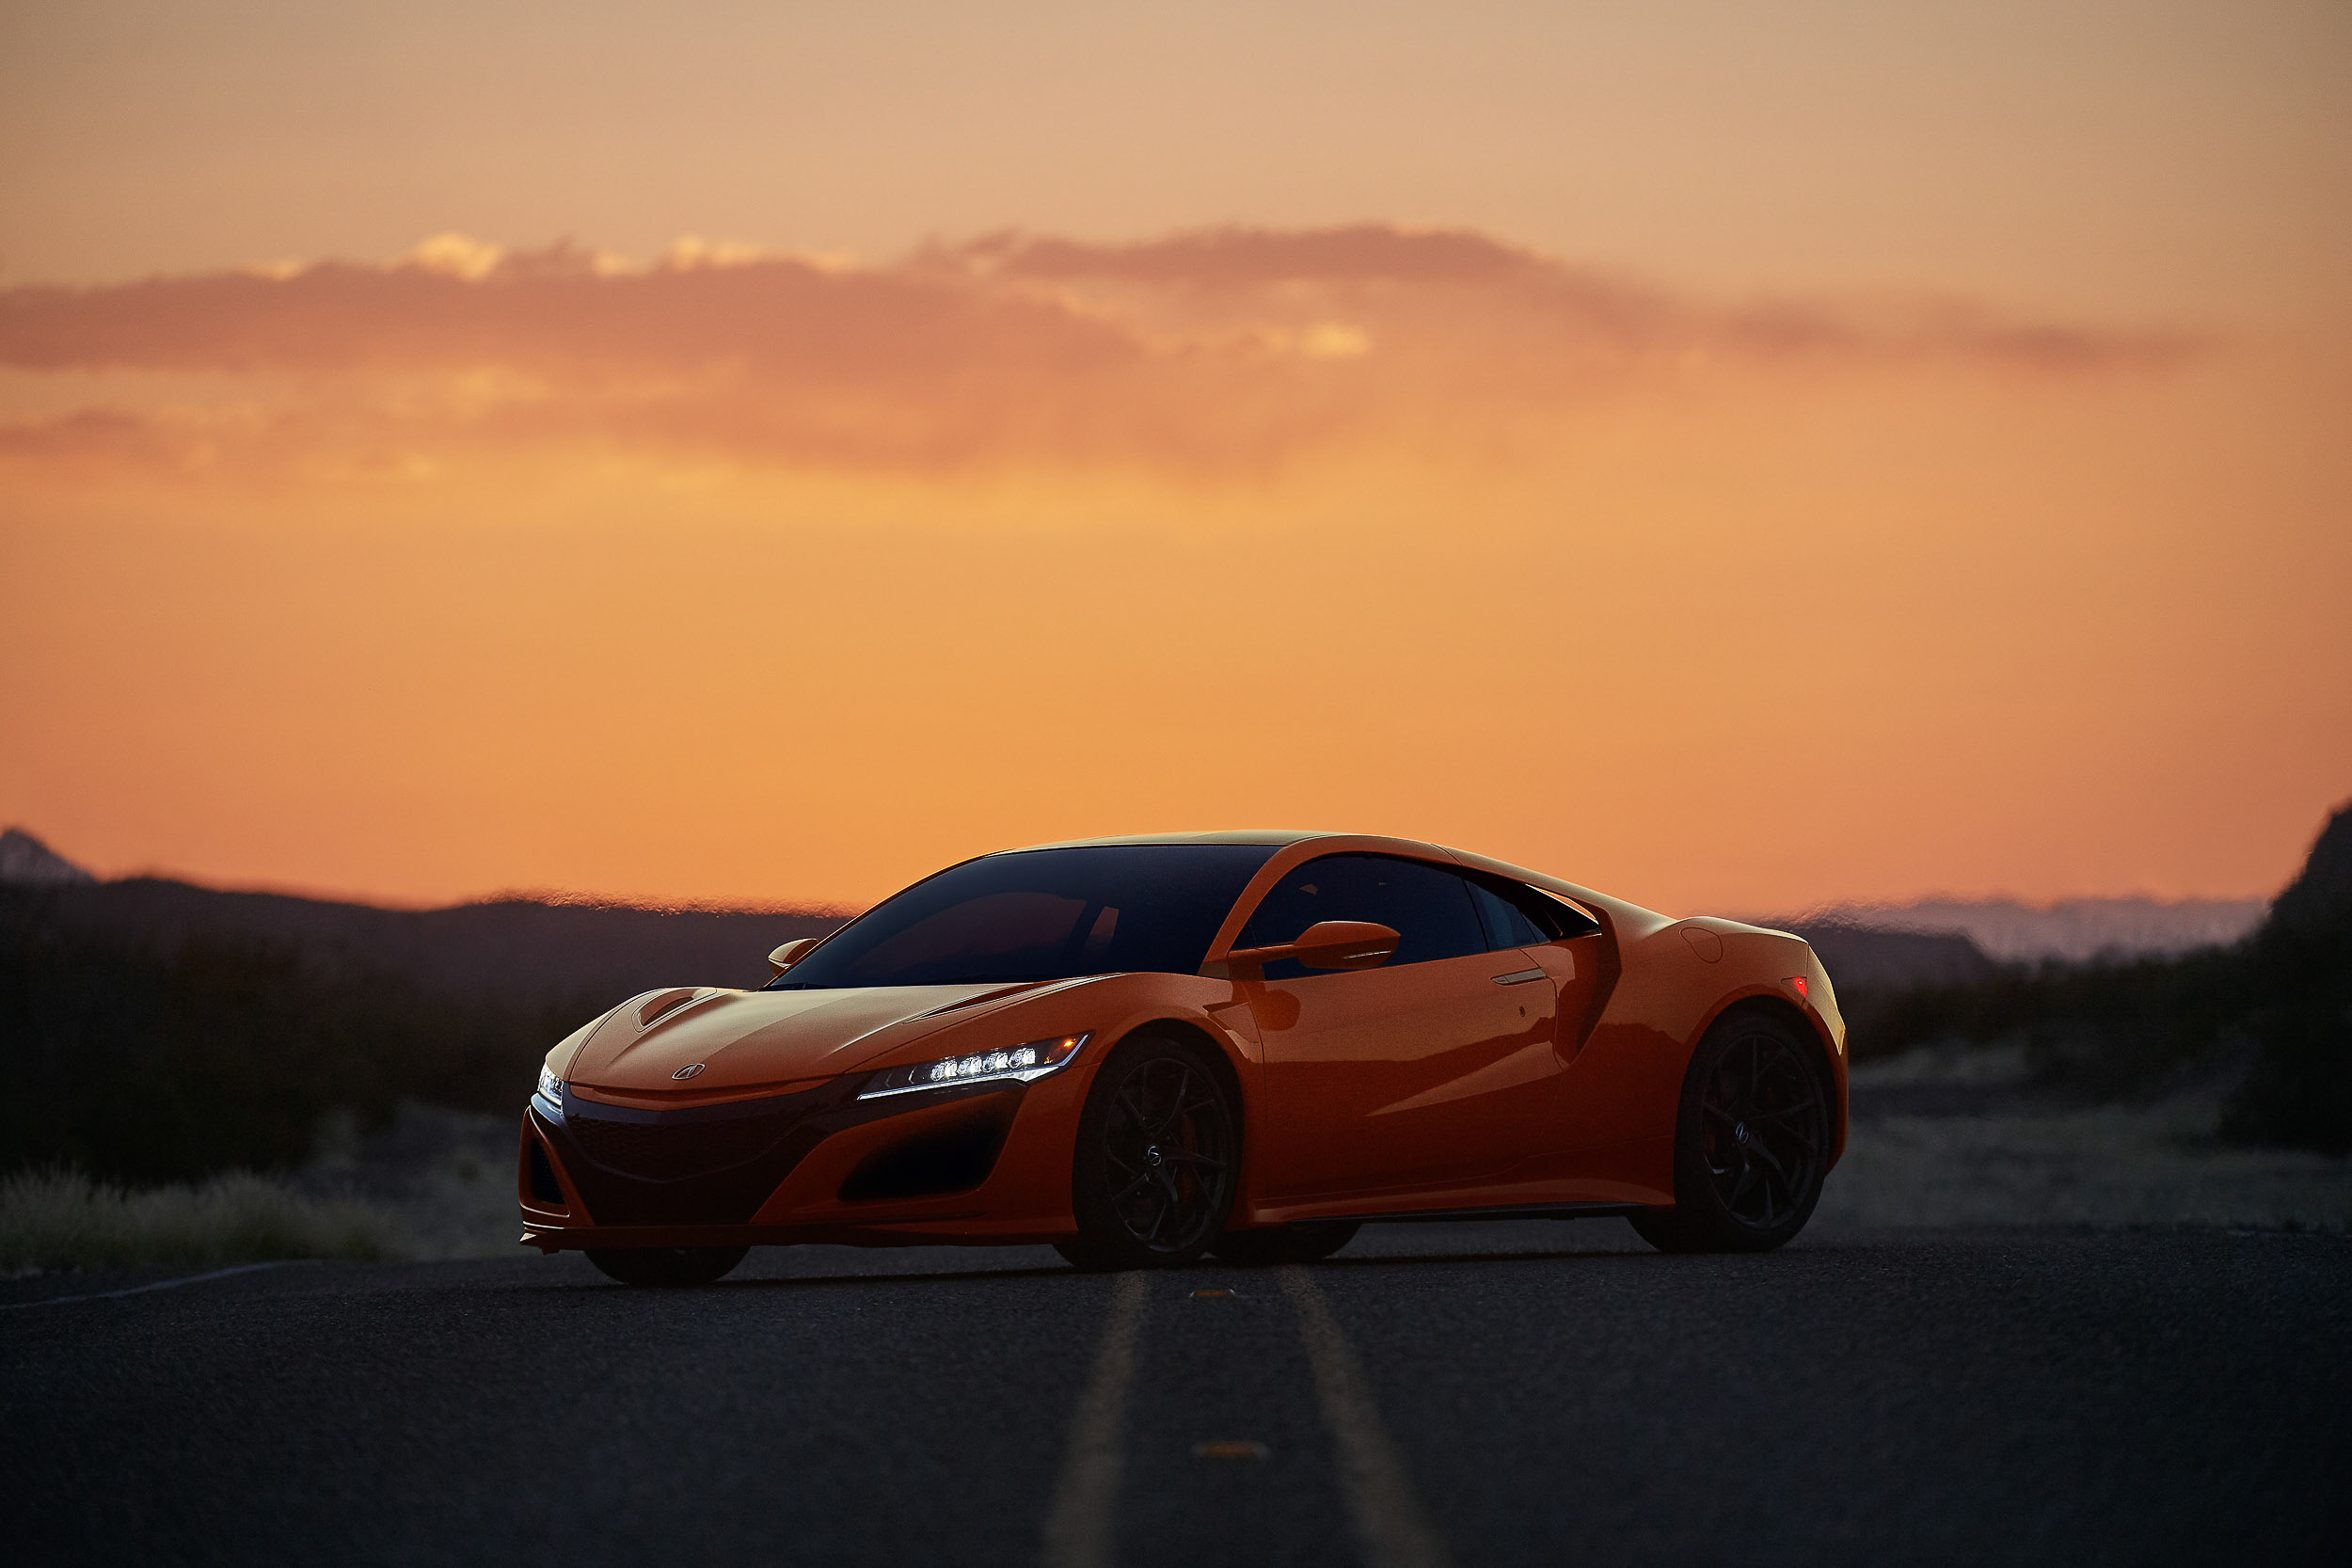 201904-BJP-Acura-day05-nsx-ext-007742_f1.3